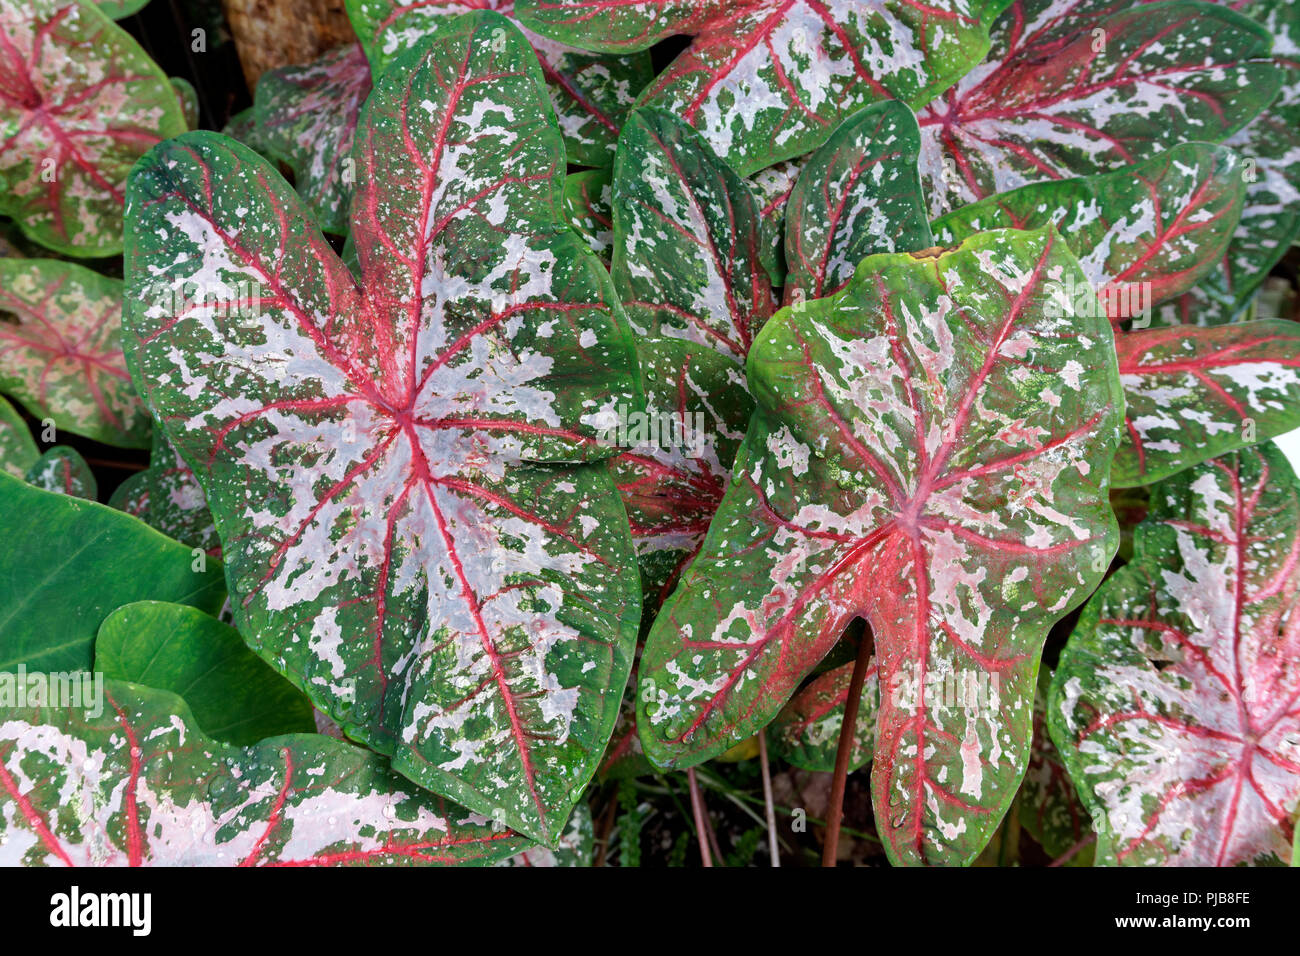 Close-up of the green, red, and white decorative leaves of a Caladium plant hybrid Stock Photo